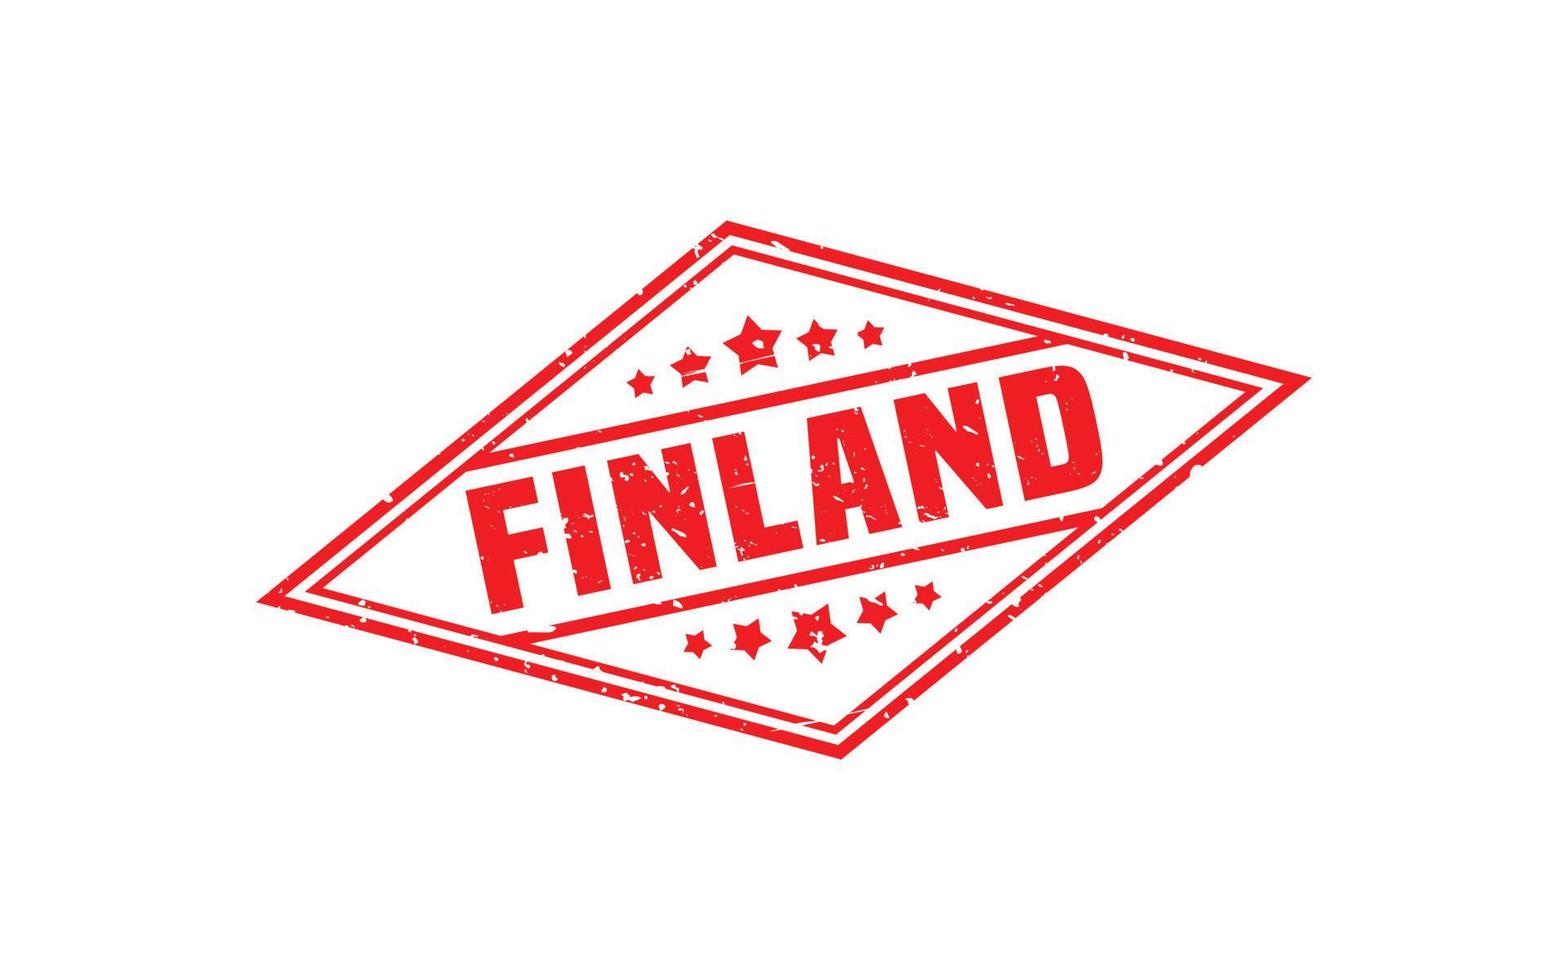 FINLAND stamp rubber with grunge style on white background vector